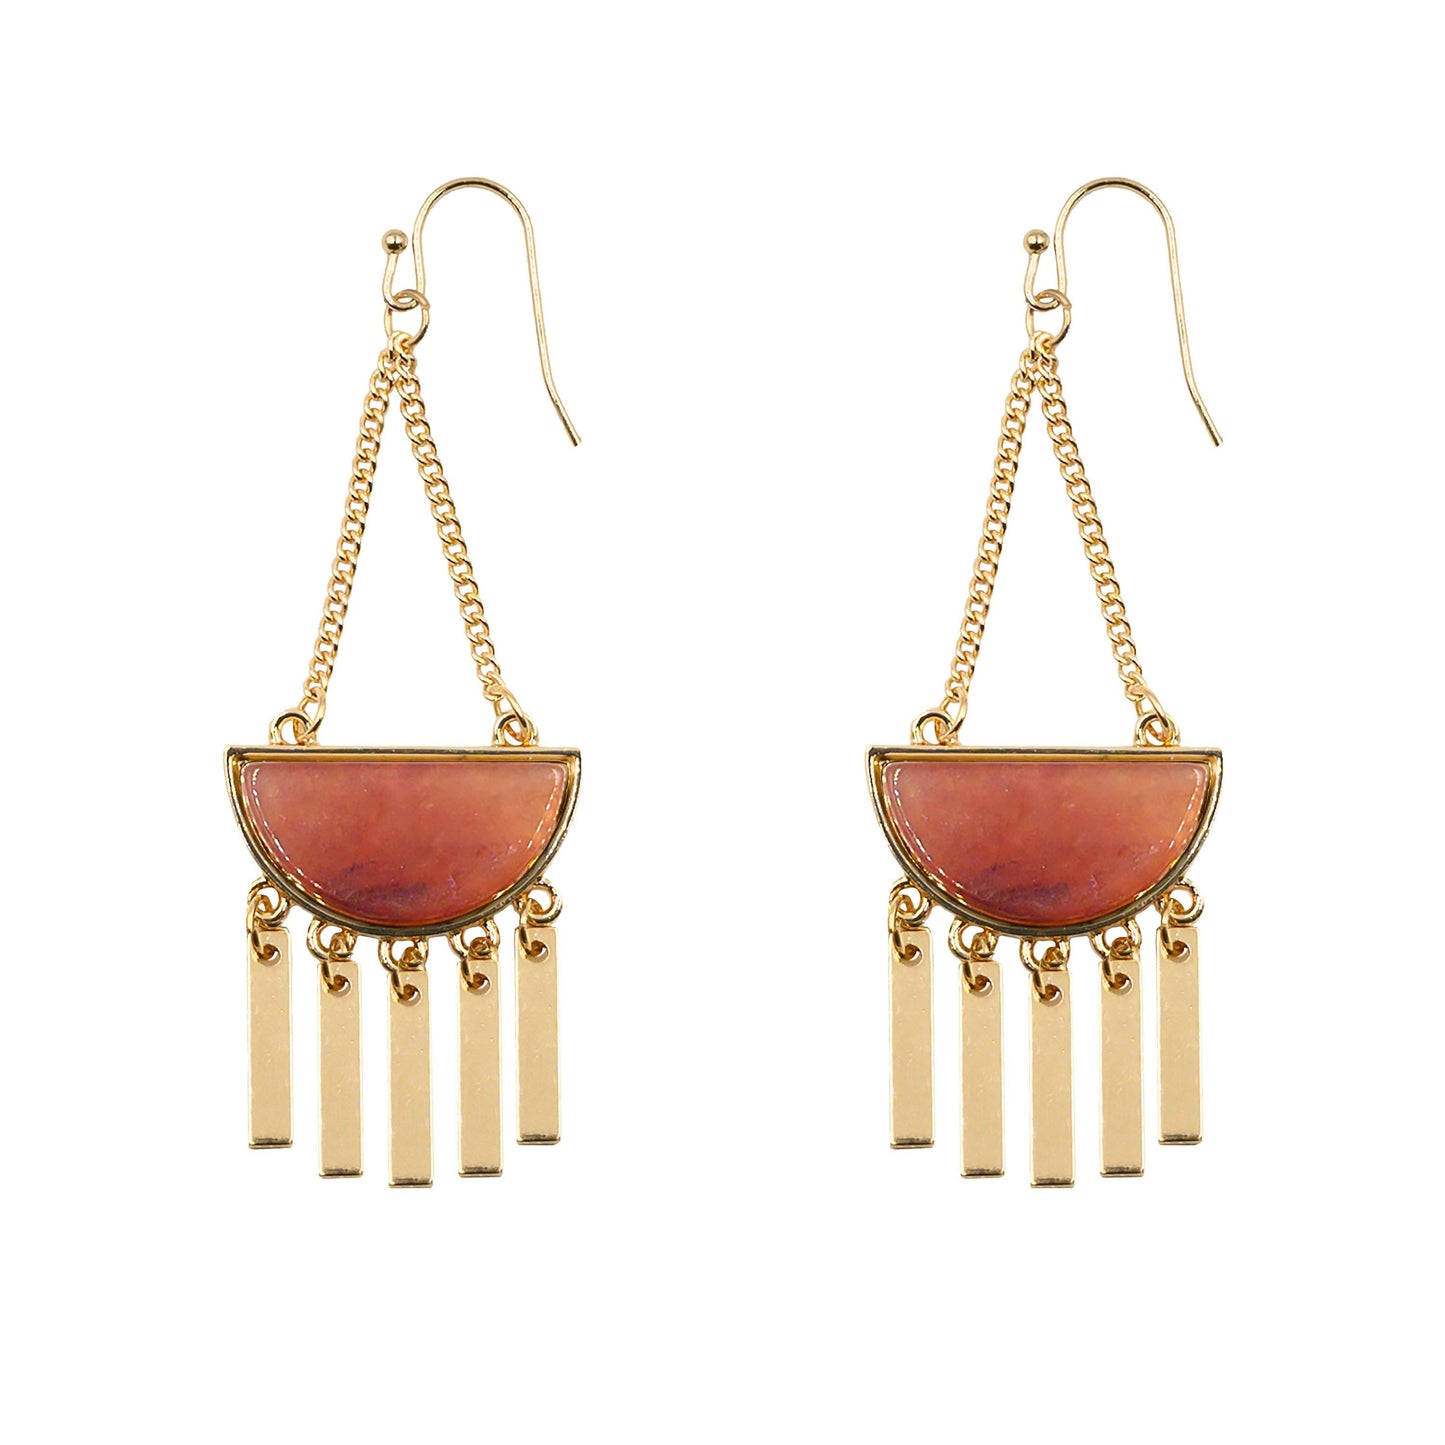 Bianca Collection - Aragonite Earrings (Limited Edition)